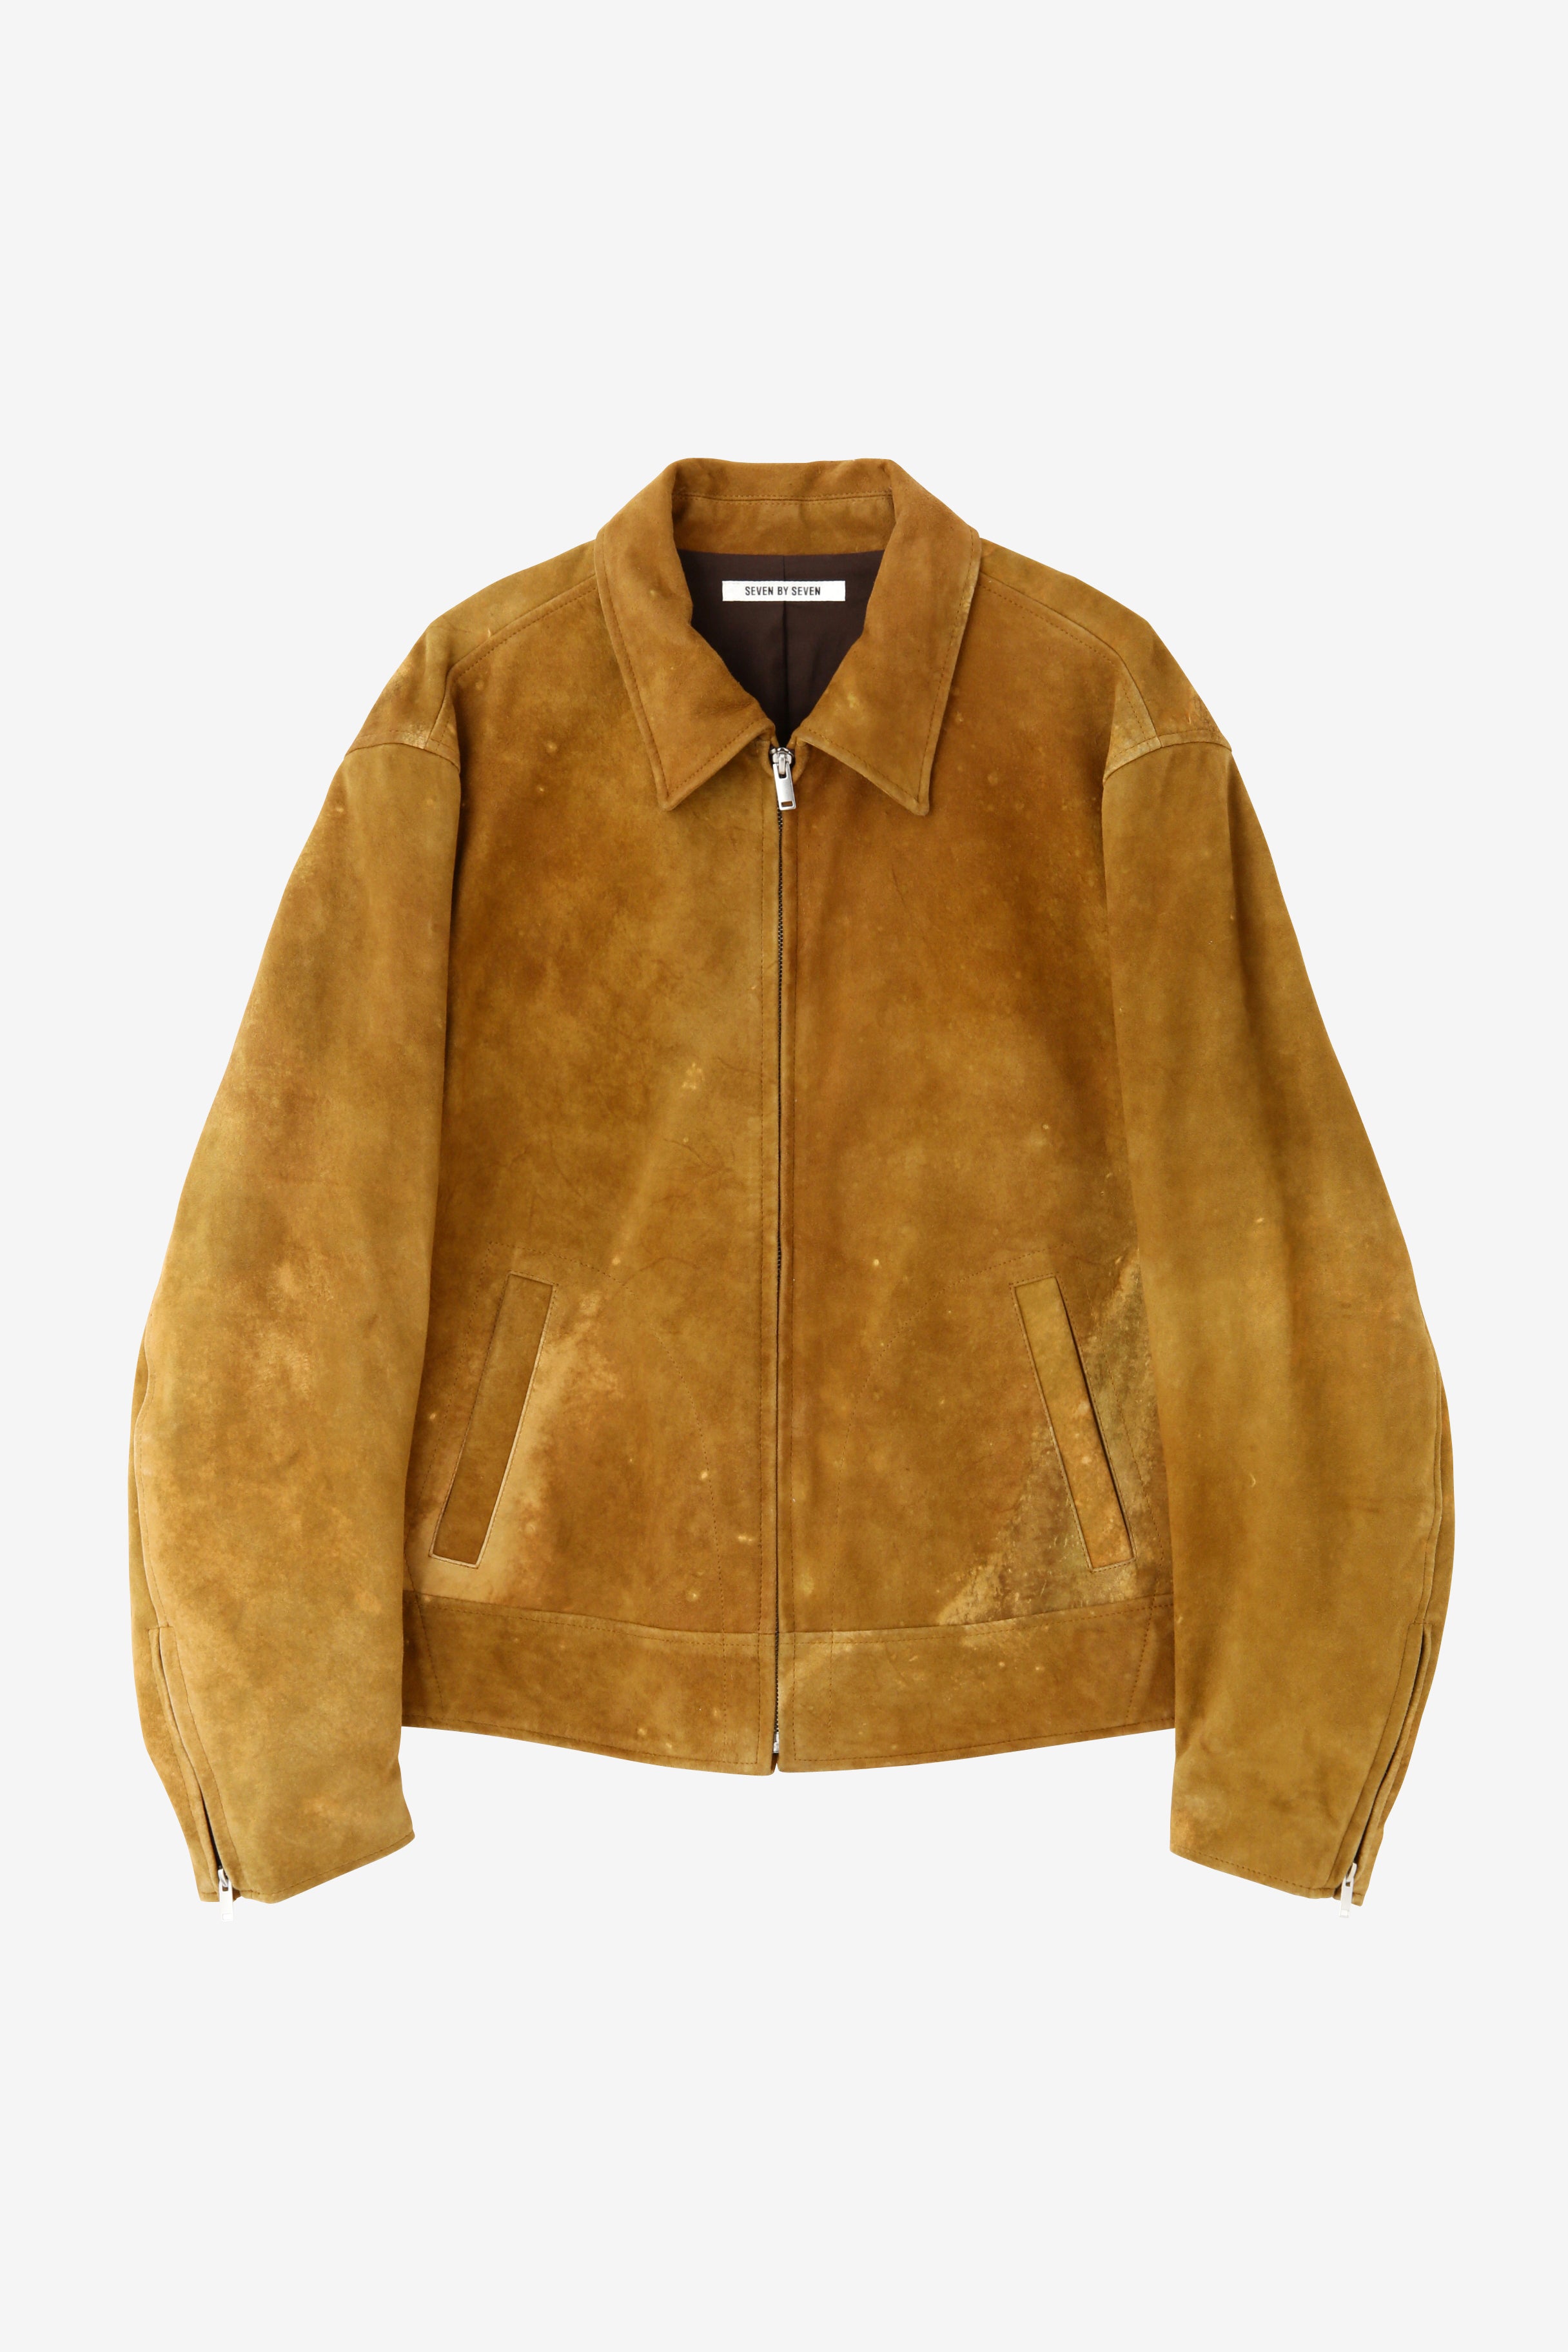 SUEDE LEATHER RIDER'S JACKET -Sheep suede cashmere finish- | SEVEN ...